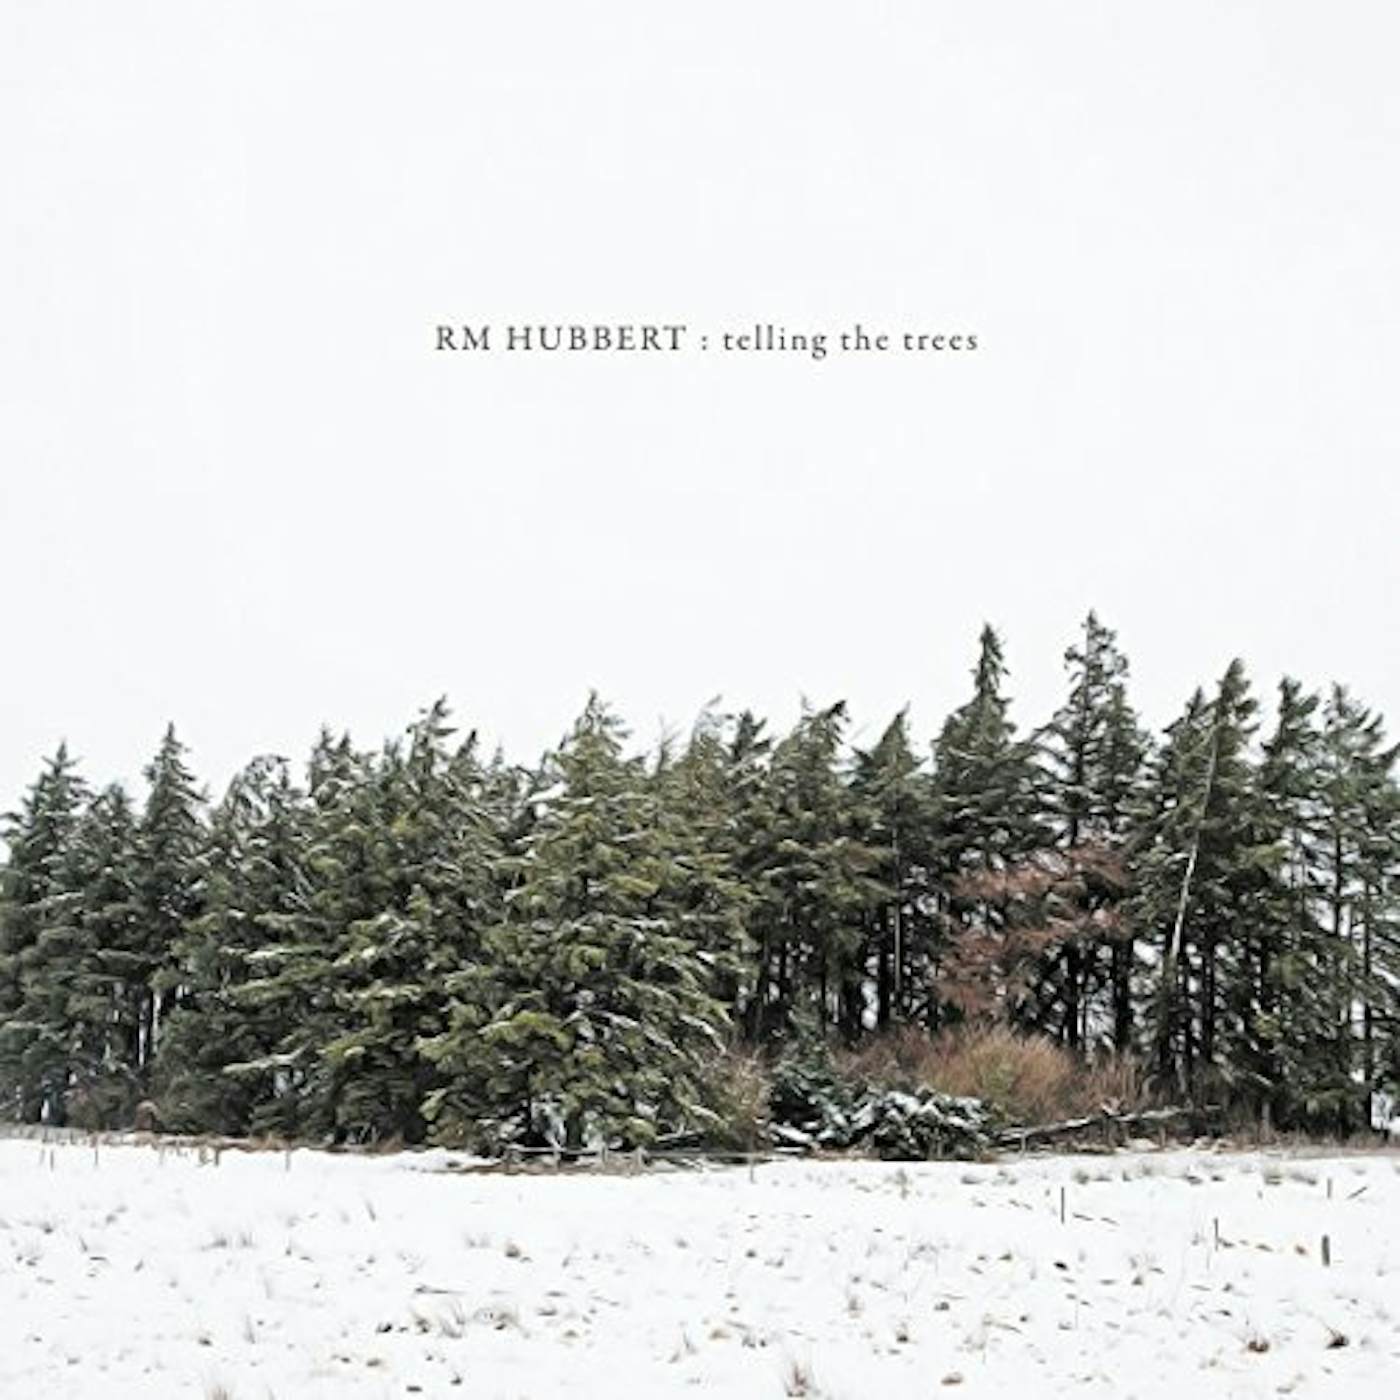 RM Hubbert TELLING THE TREES CD